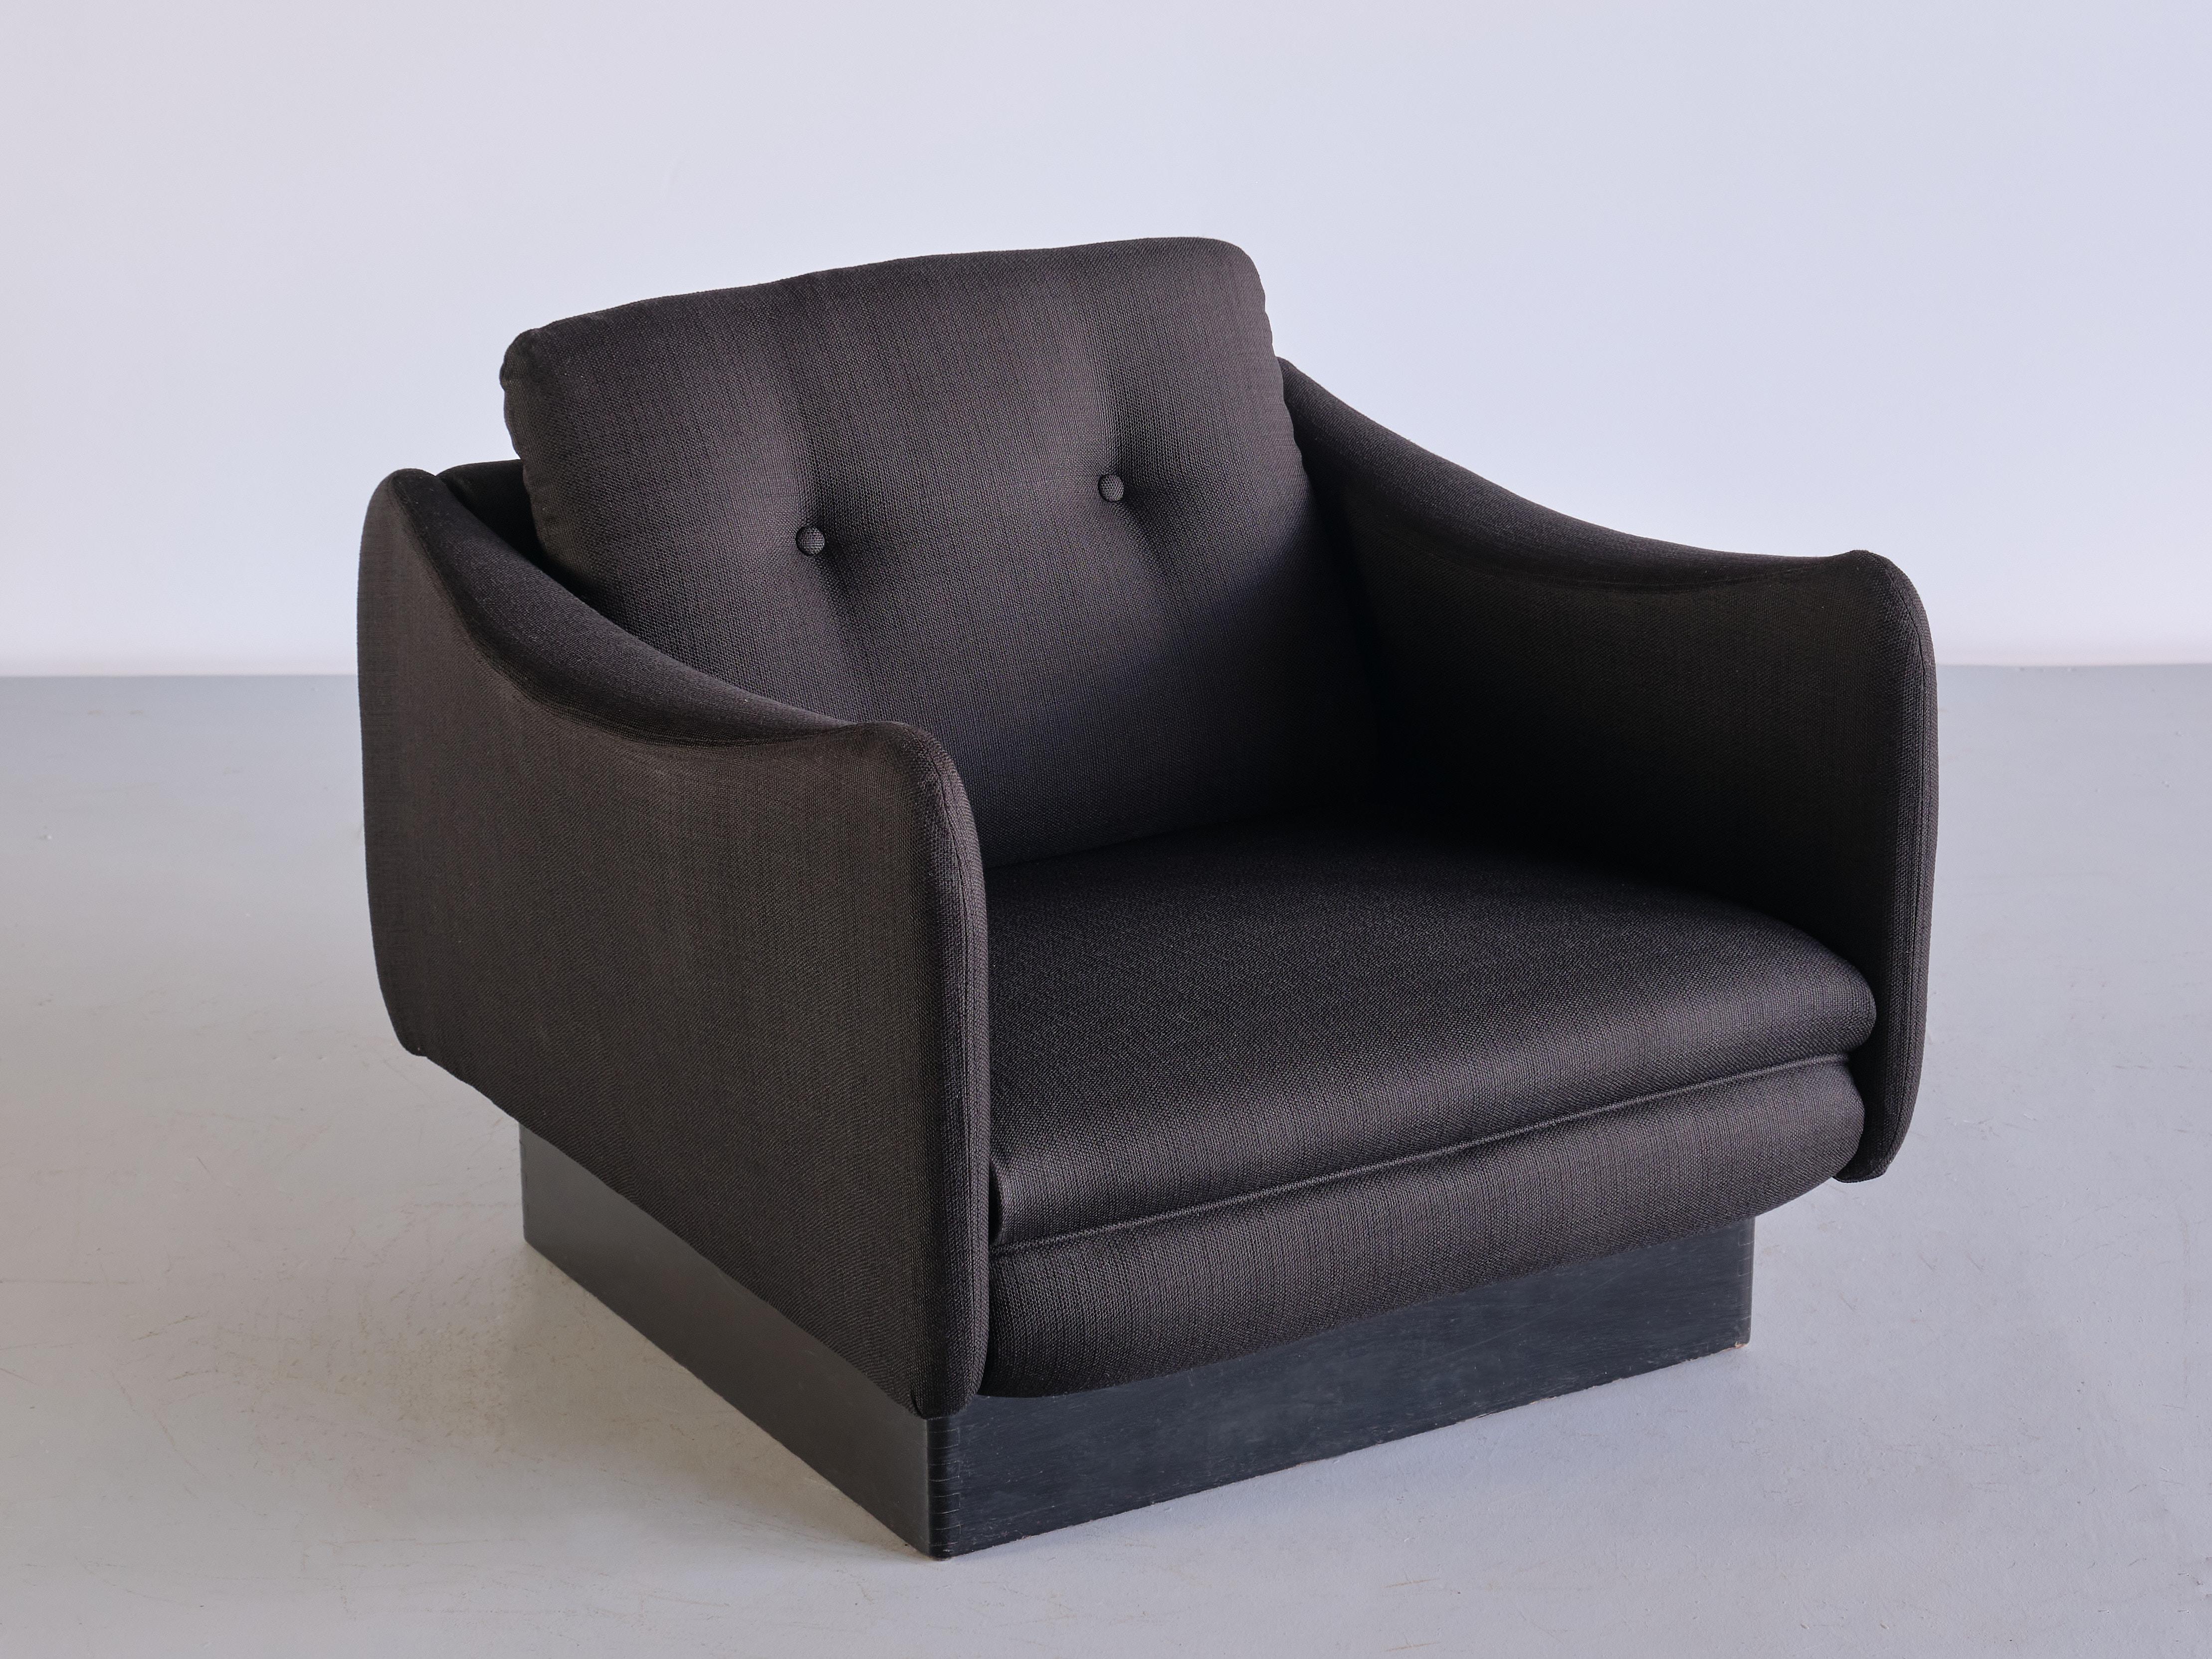 This striking lounge chair was designed by Michel Mortier and produced by the French manufacturer Sièges Steiner in 1963. This particular model named 'Teckel' and is one of the best known designs by Mortier. The square base of this low lounge is in